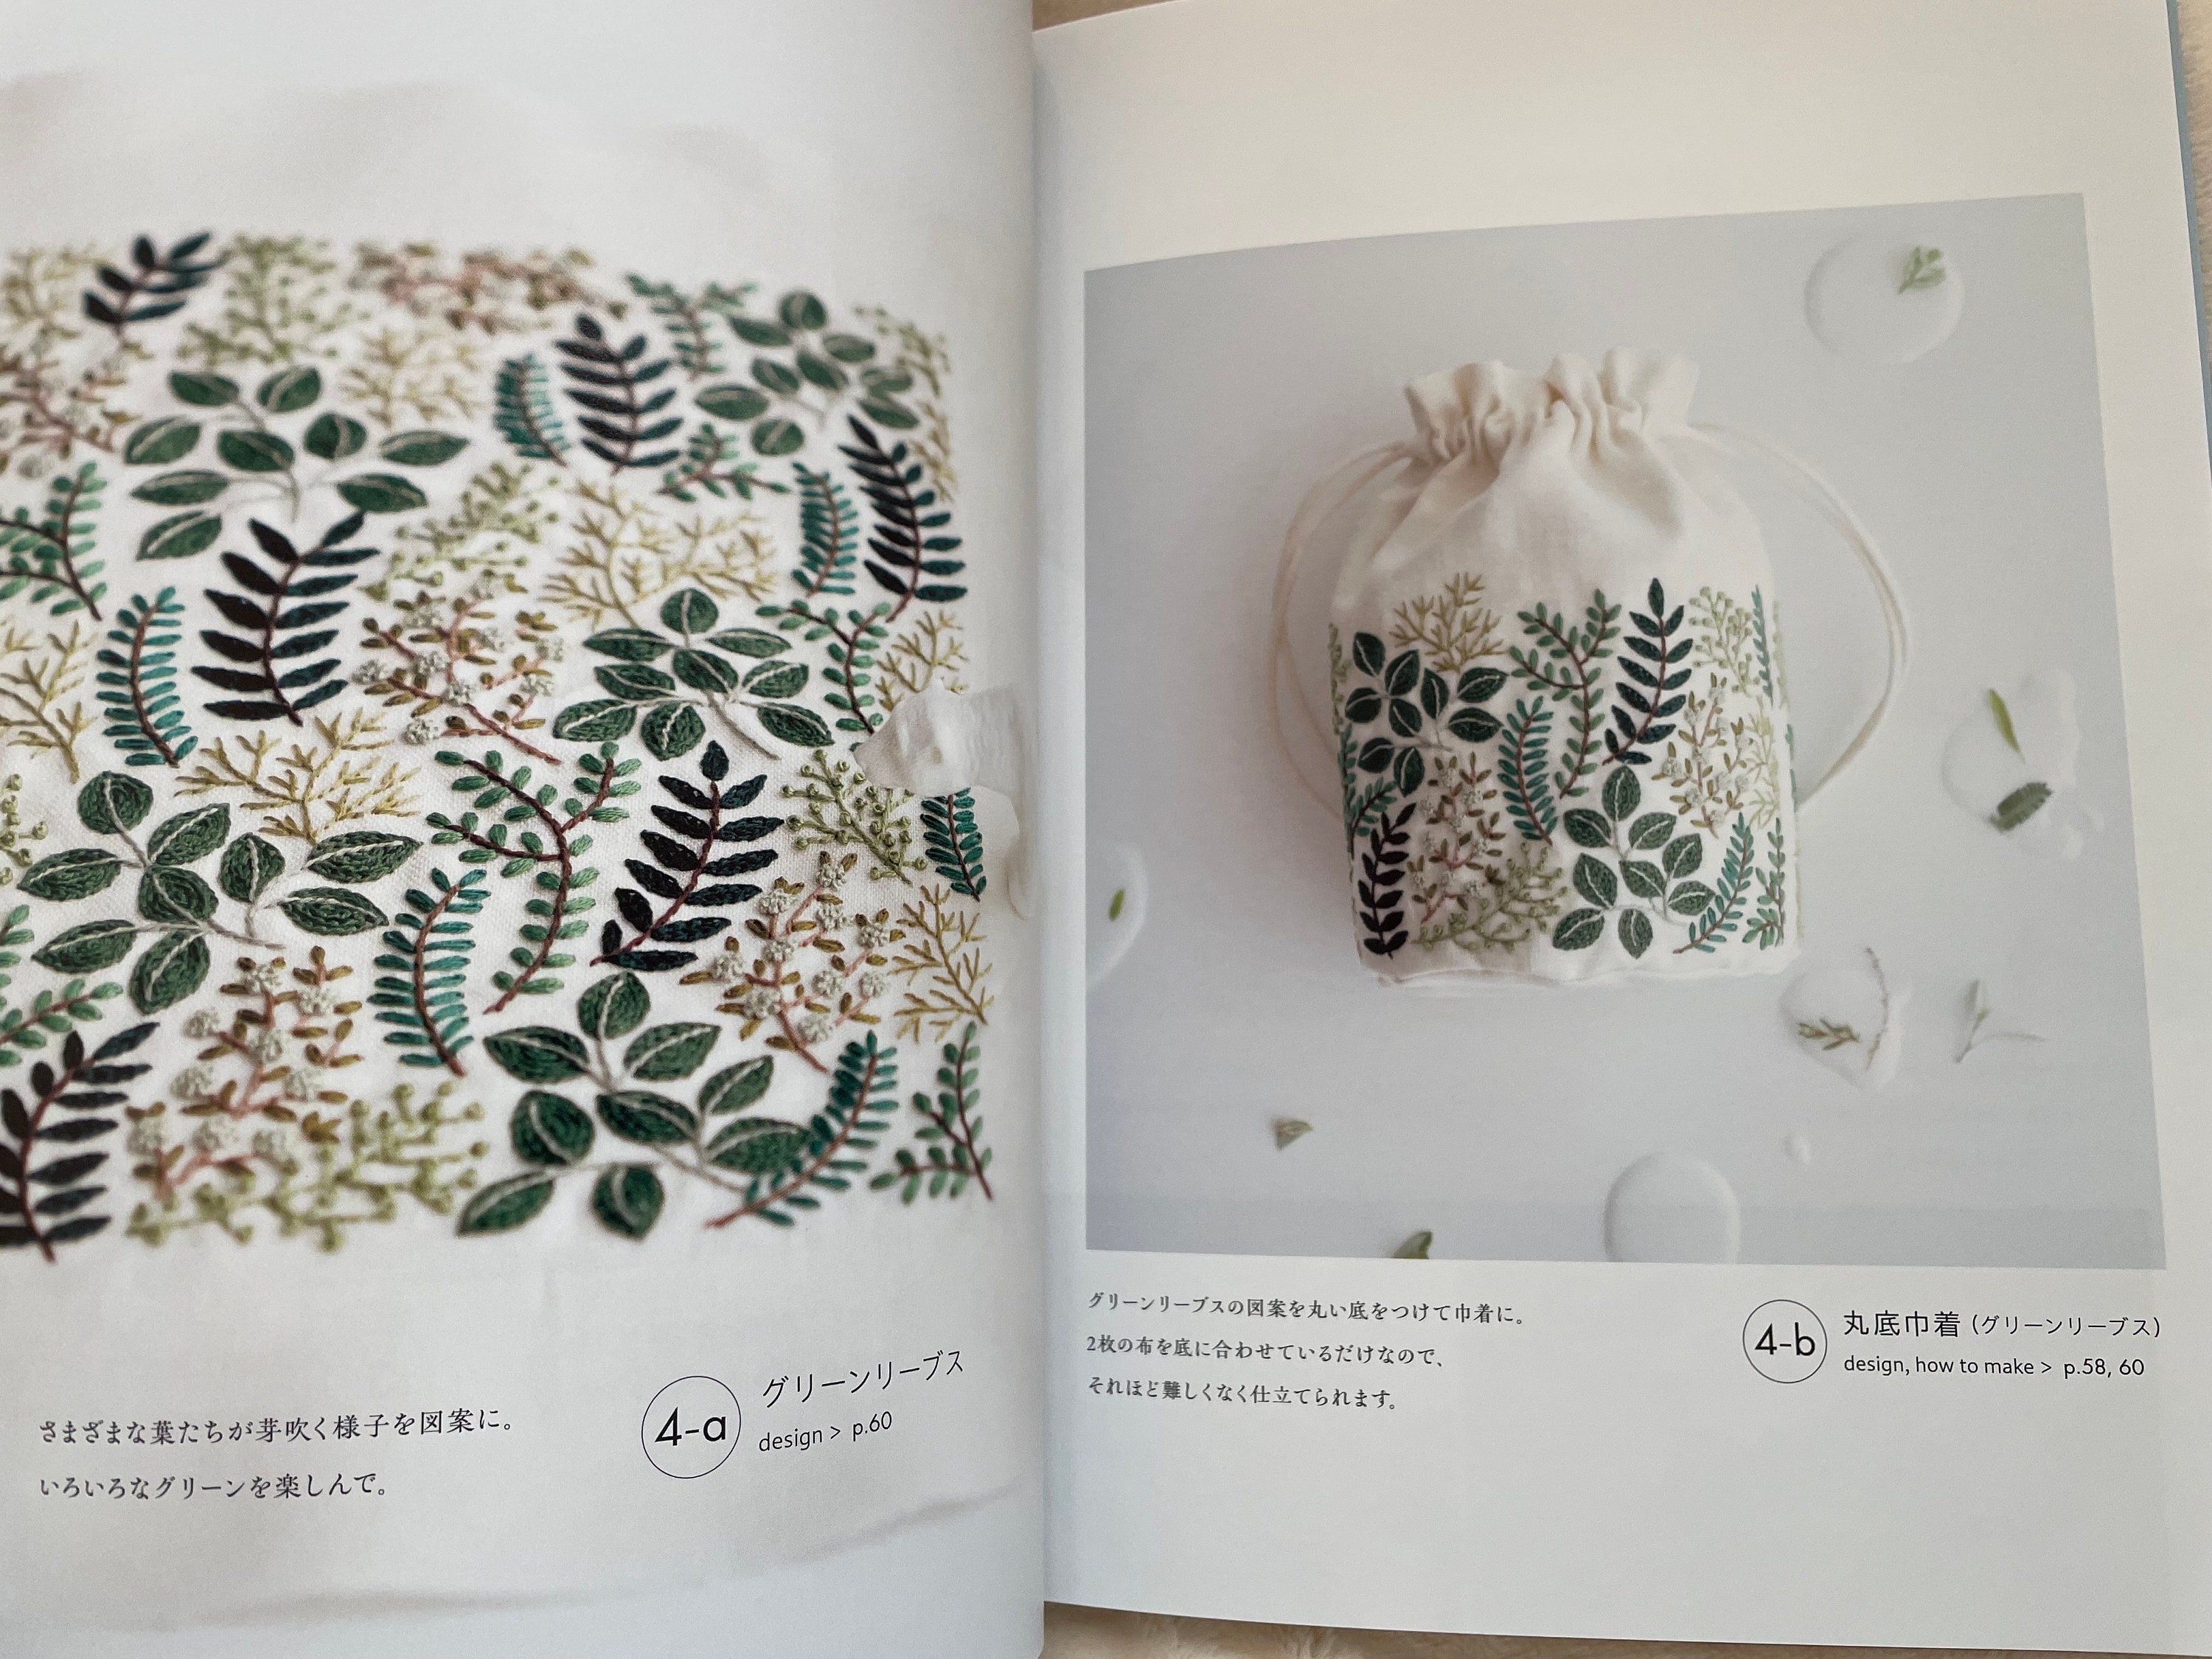 Japanese Paper Notebooks Featuring Vintage Science Illustrations Merged  with Hand-embroidery — Colossal